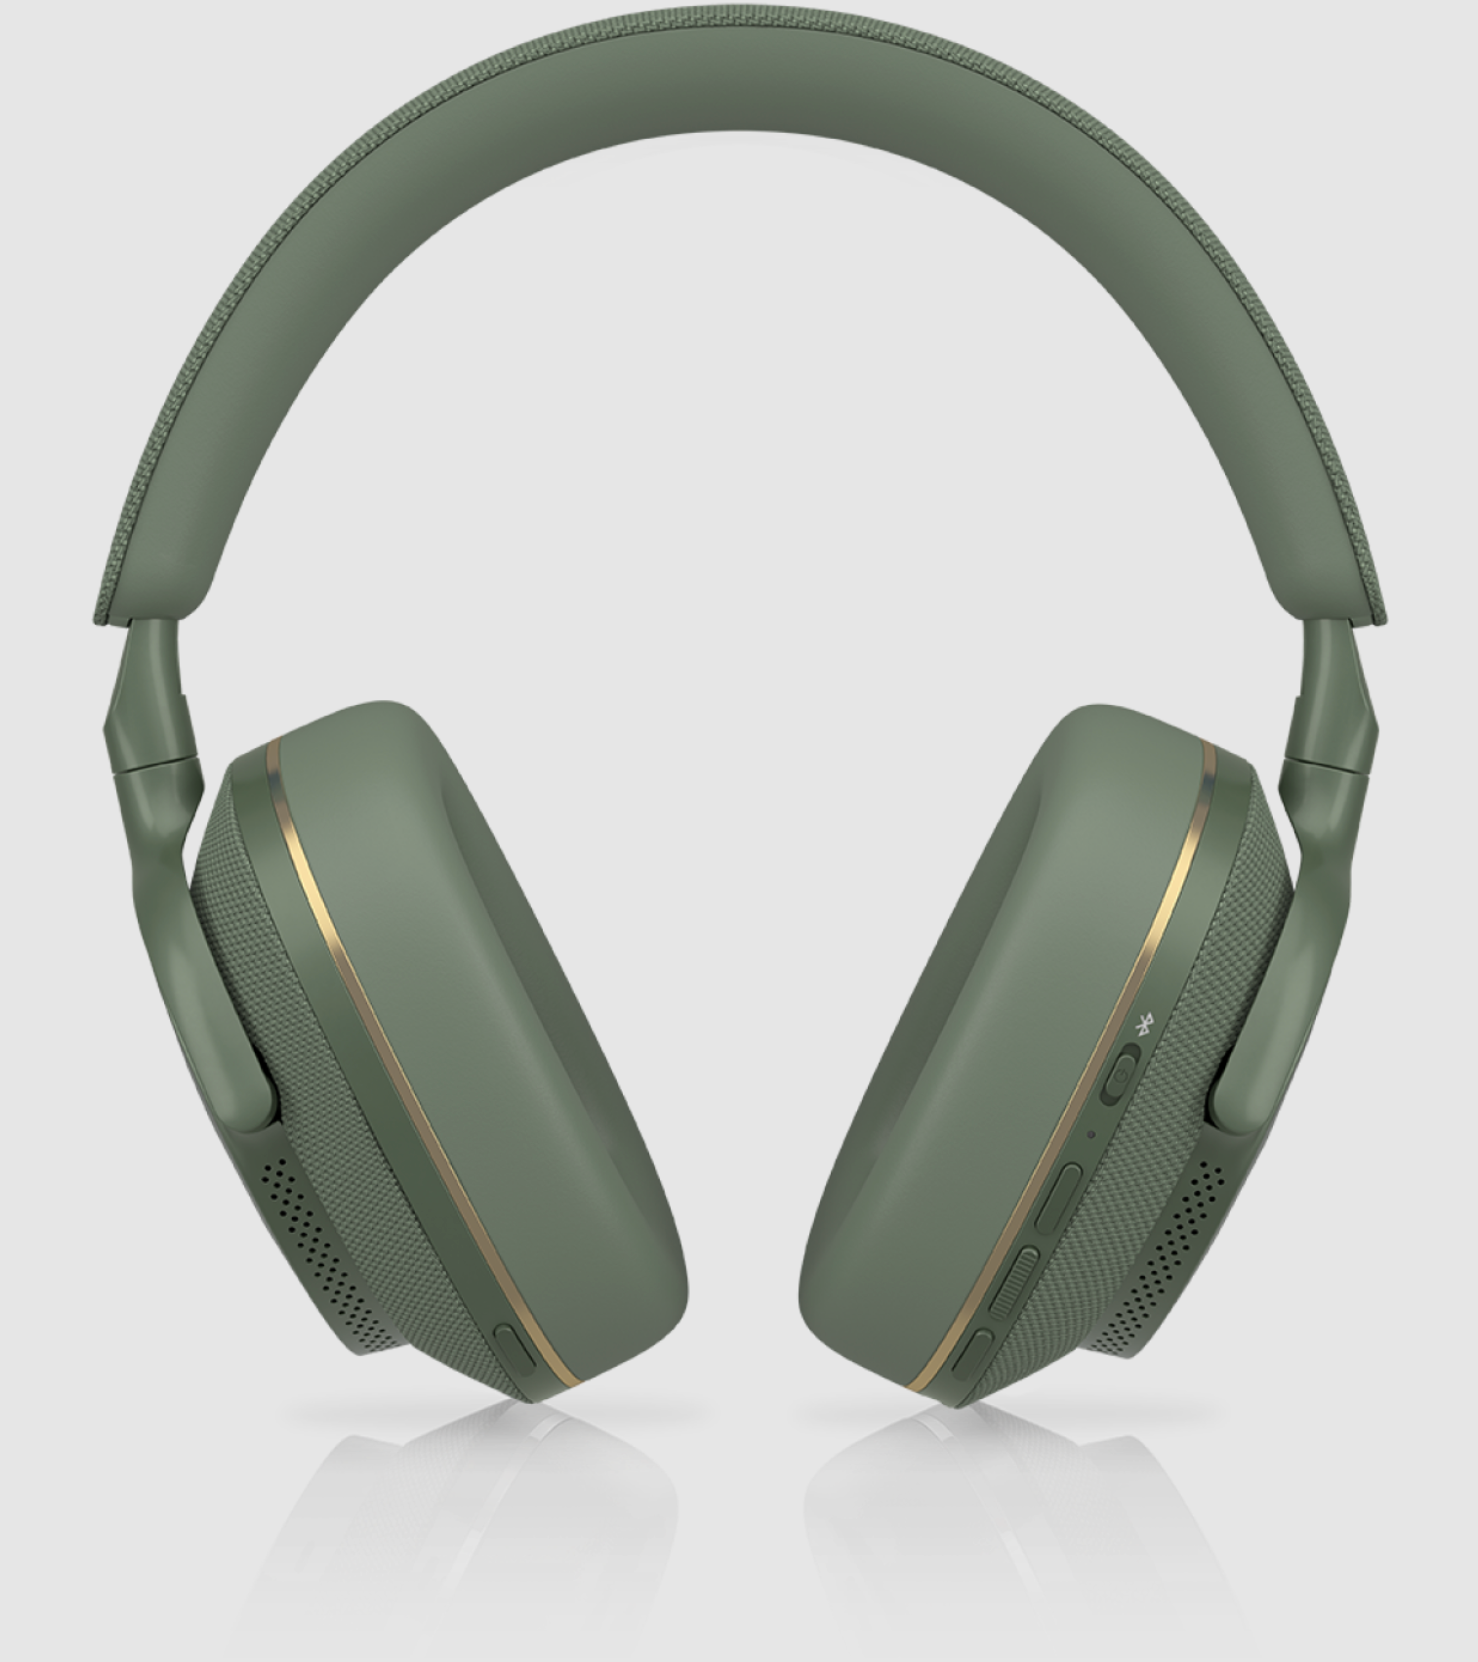 B&W Px7 S2e Noise Cancelling Headphones in Forest Green. Image shows controls